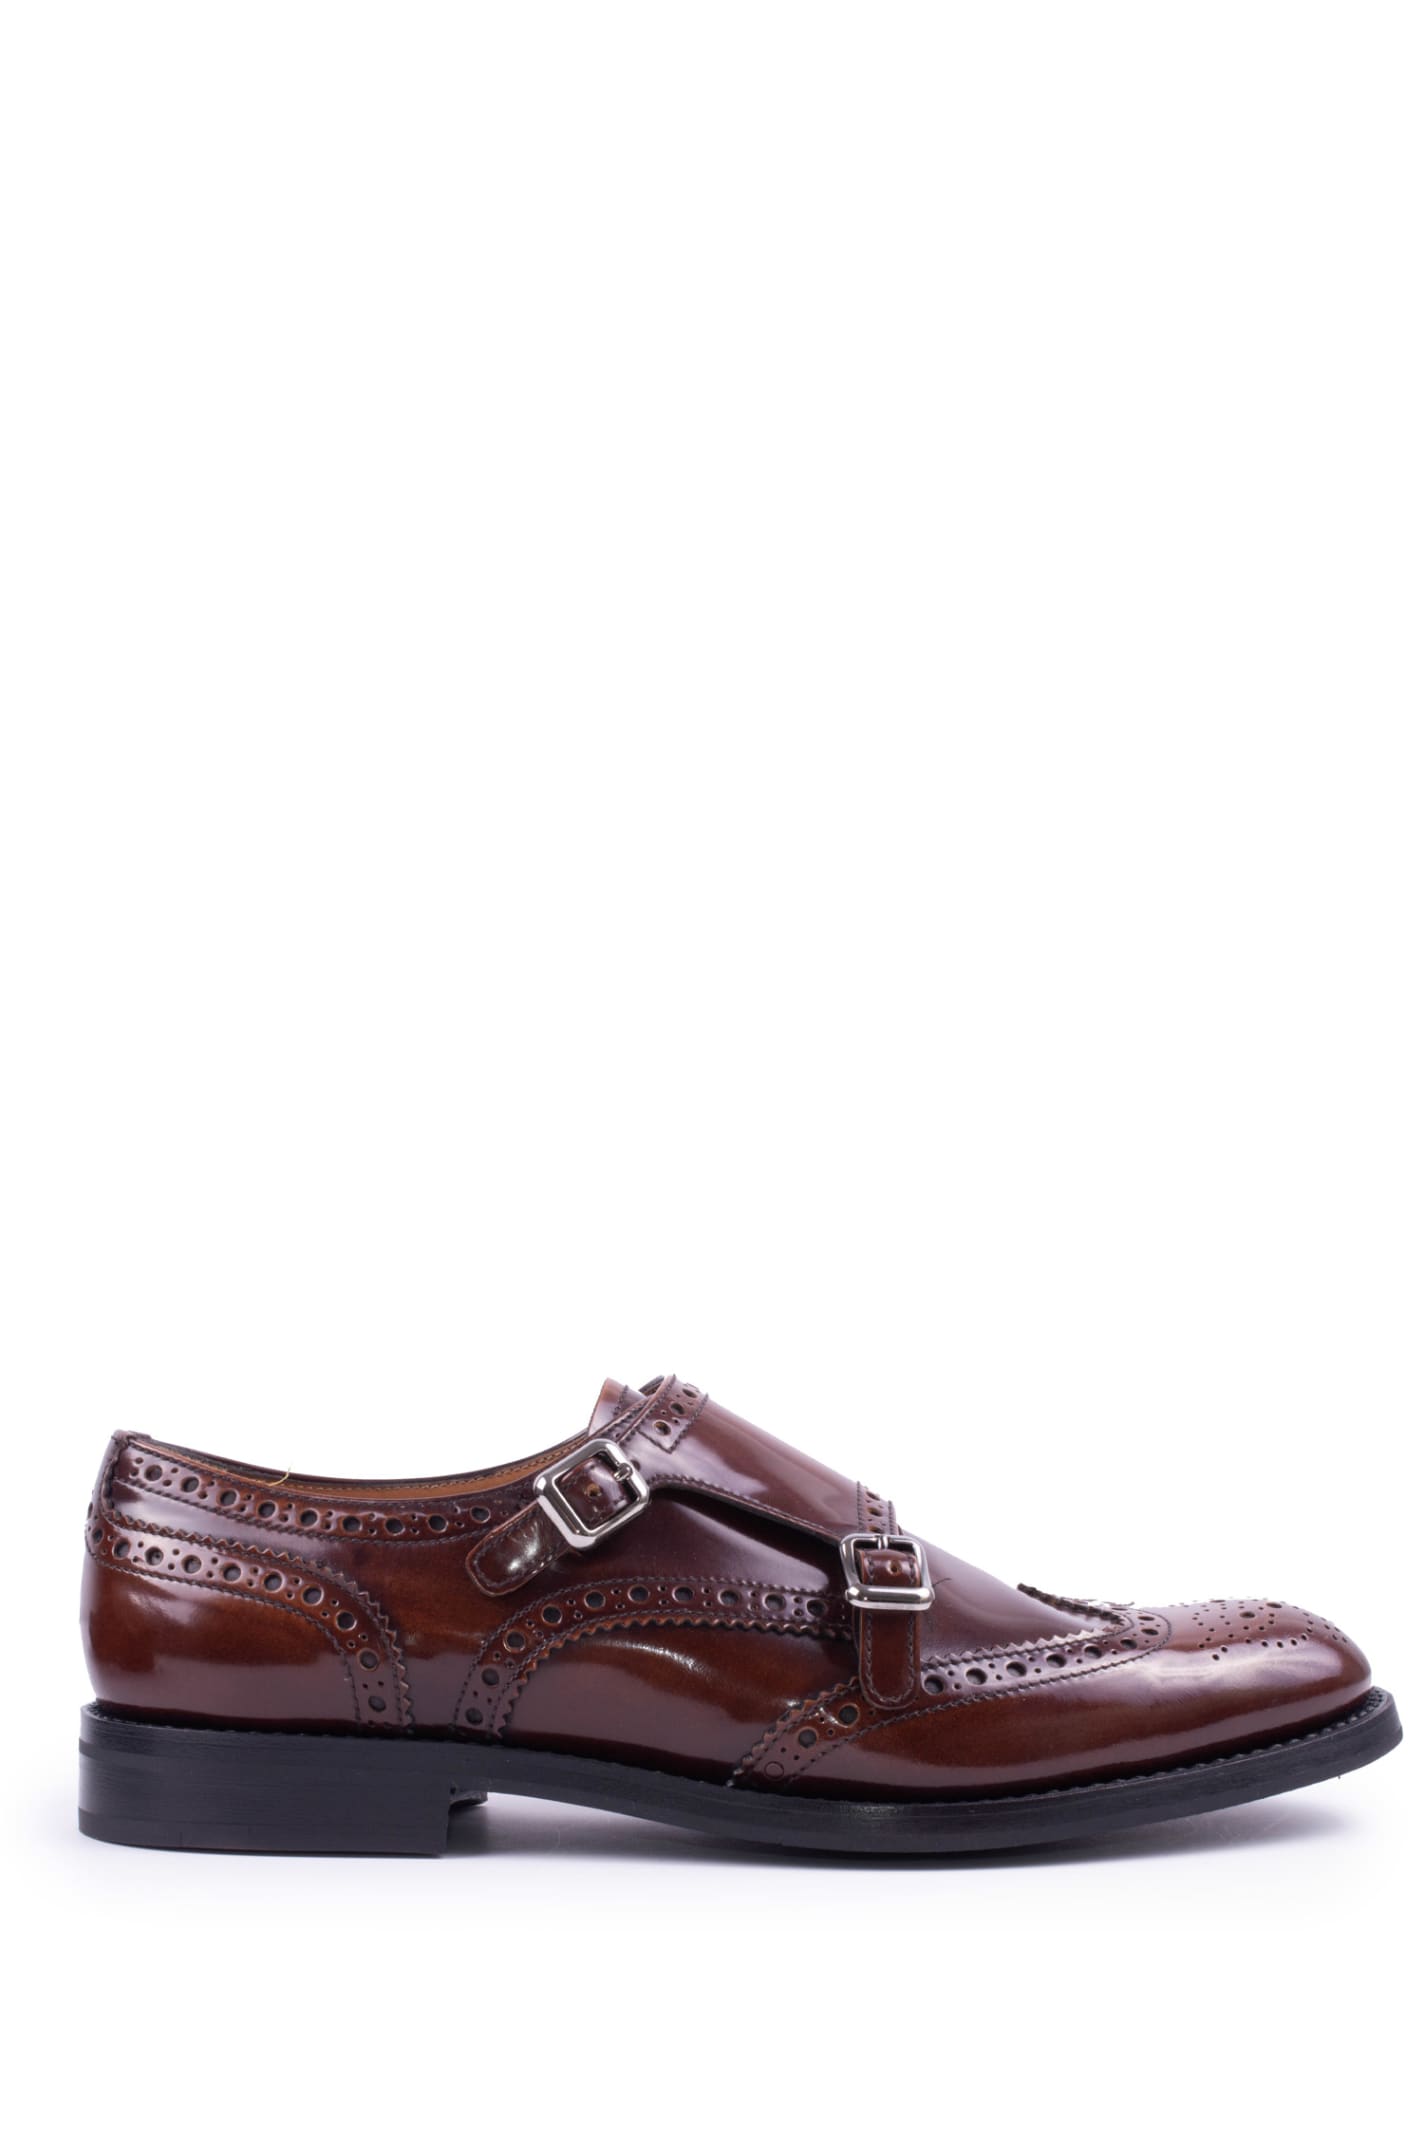 Church's Leather Monk Strap